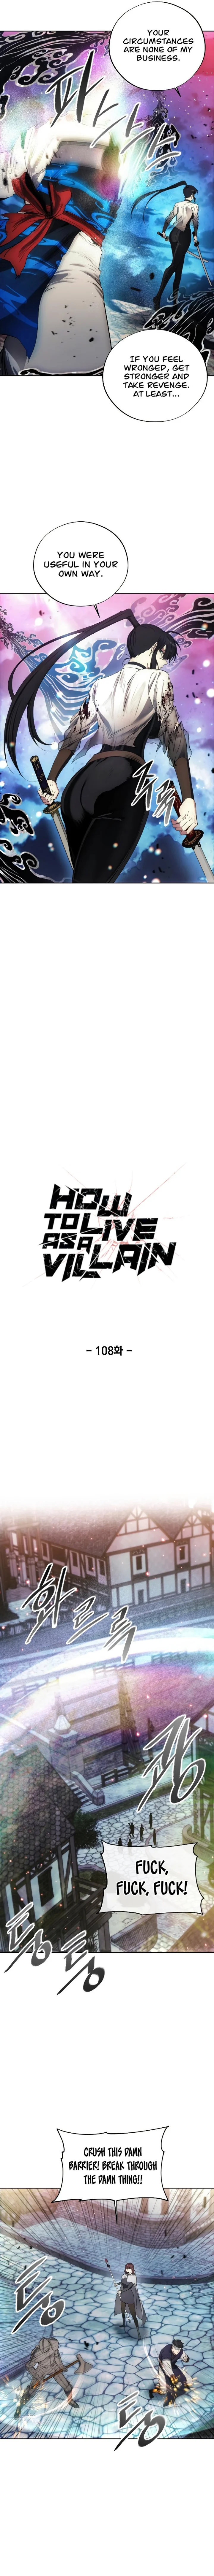 How to Live as a Villain - Chapter 108 Page 5